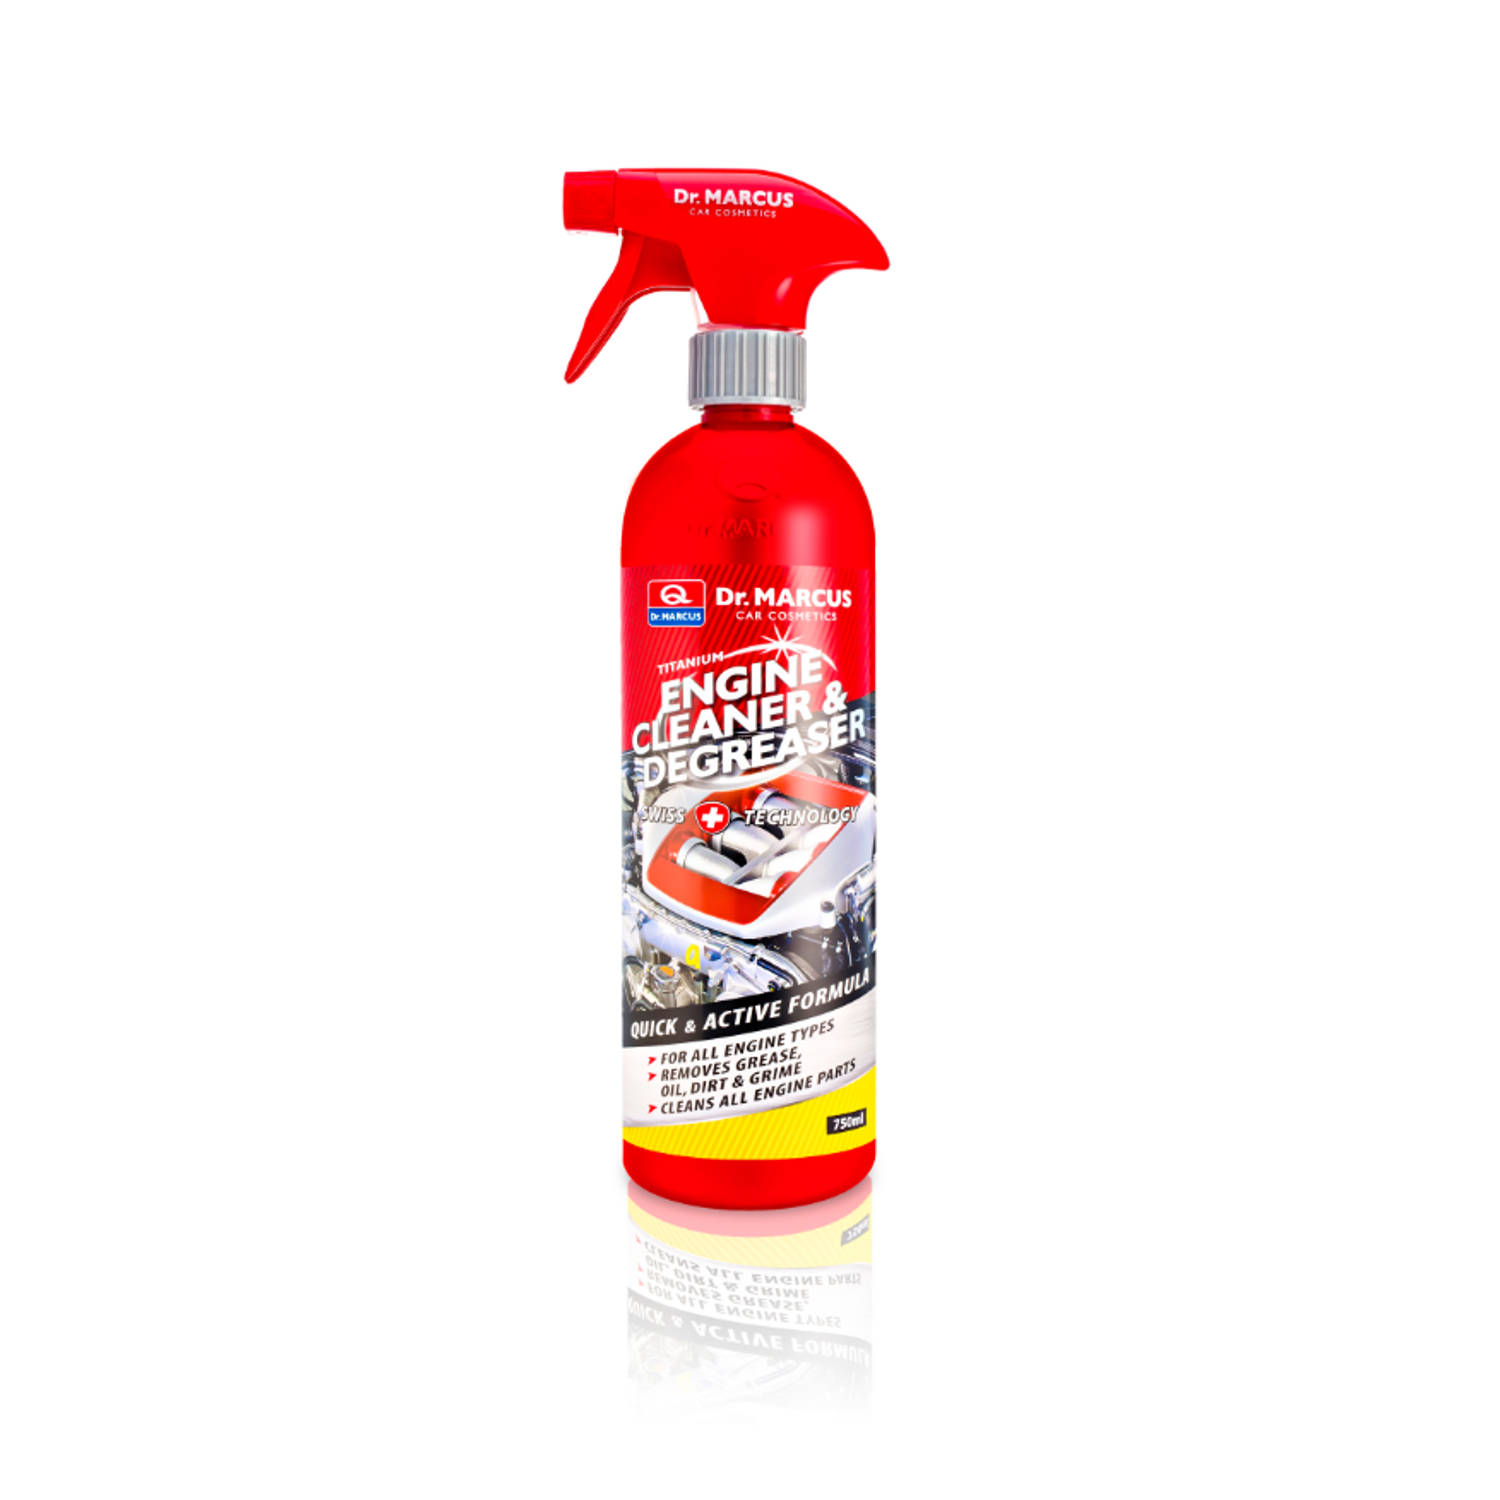 Dr. Marcus engine cleaner & degreaser